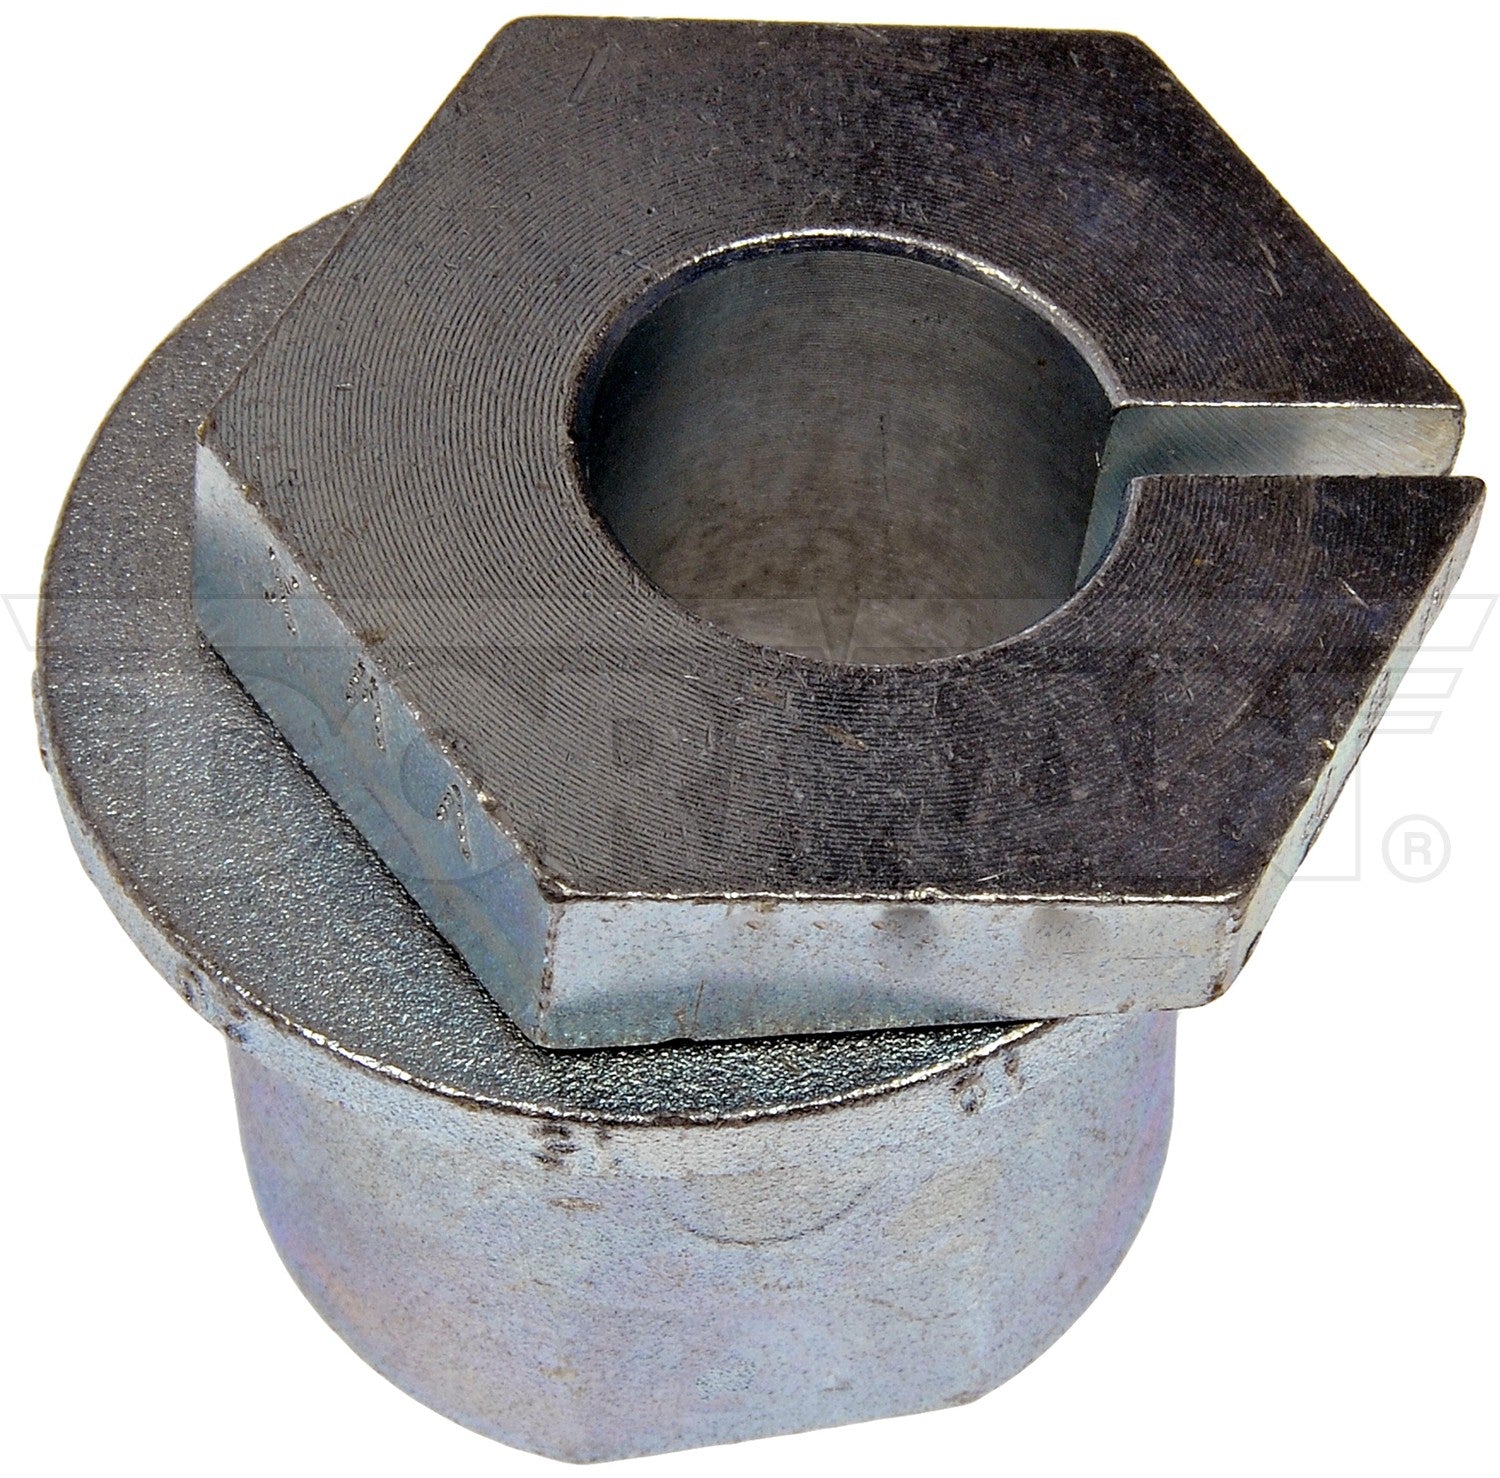 Dorman 545-186 Front Alignment Caster / Camber Bushing for Ford Bronco II F-100 F-150 F-250 F-350 Ranger RWD